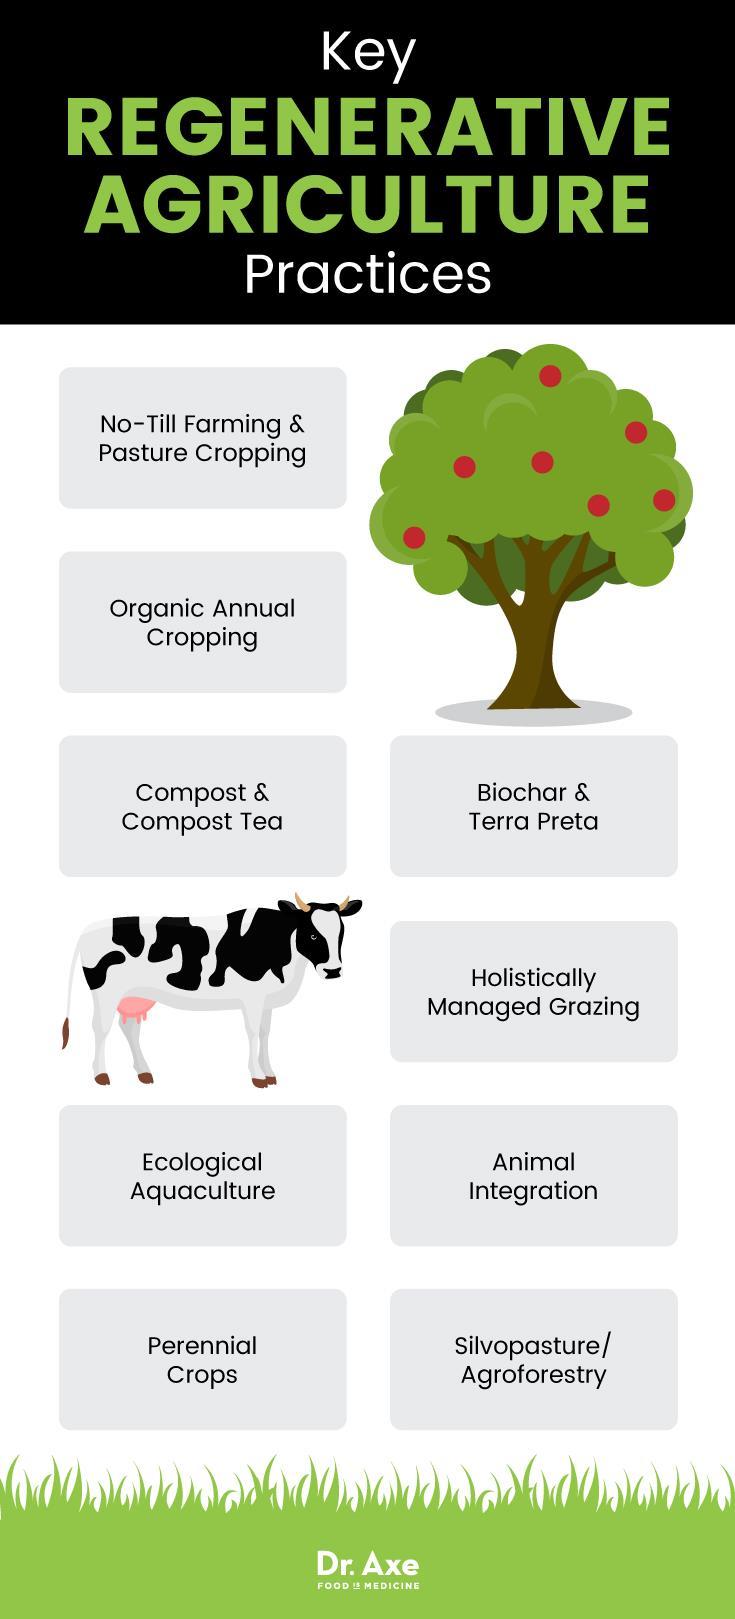 Regenerative Agriculture is the New Sustainability - Focus on soil health versus certification